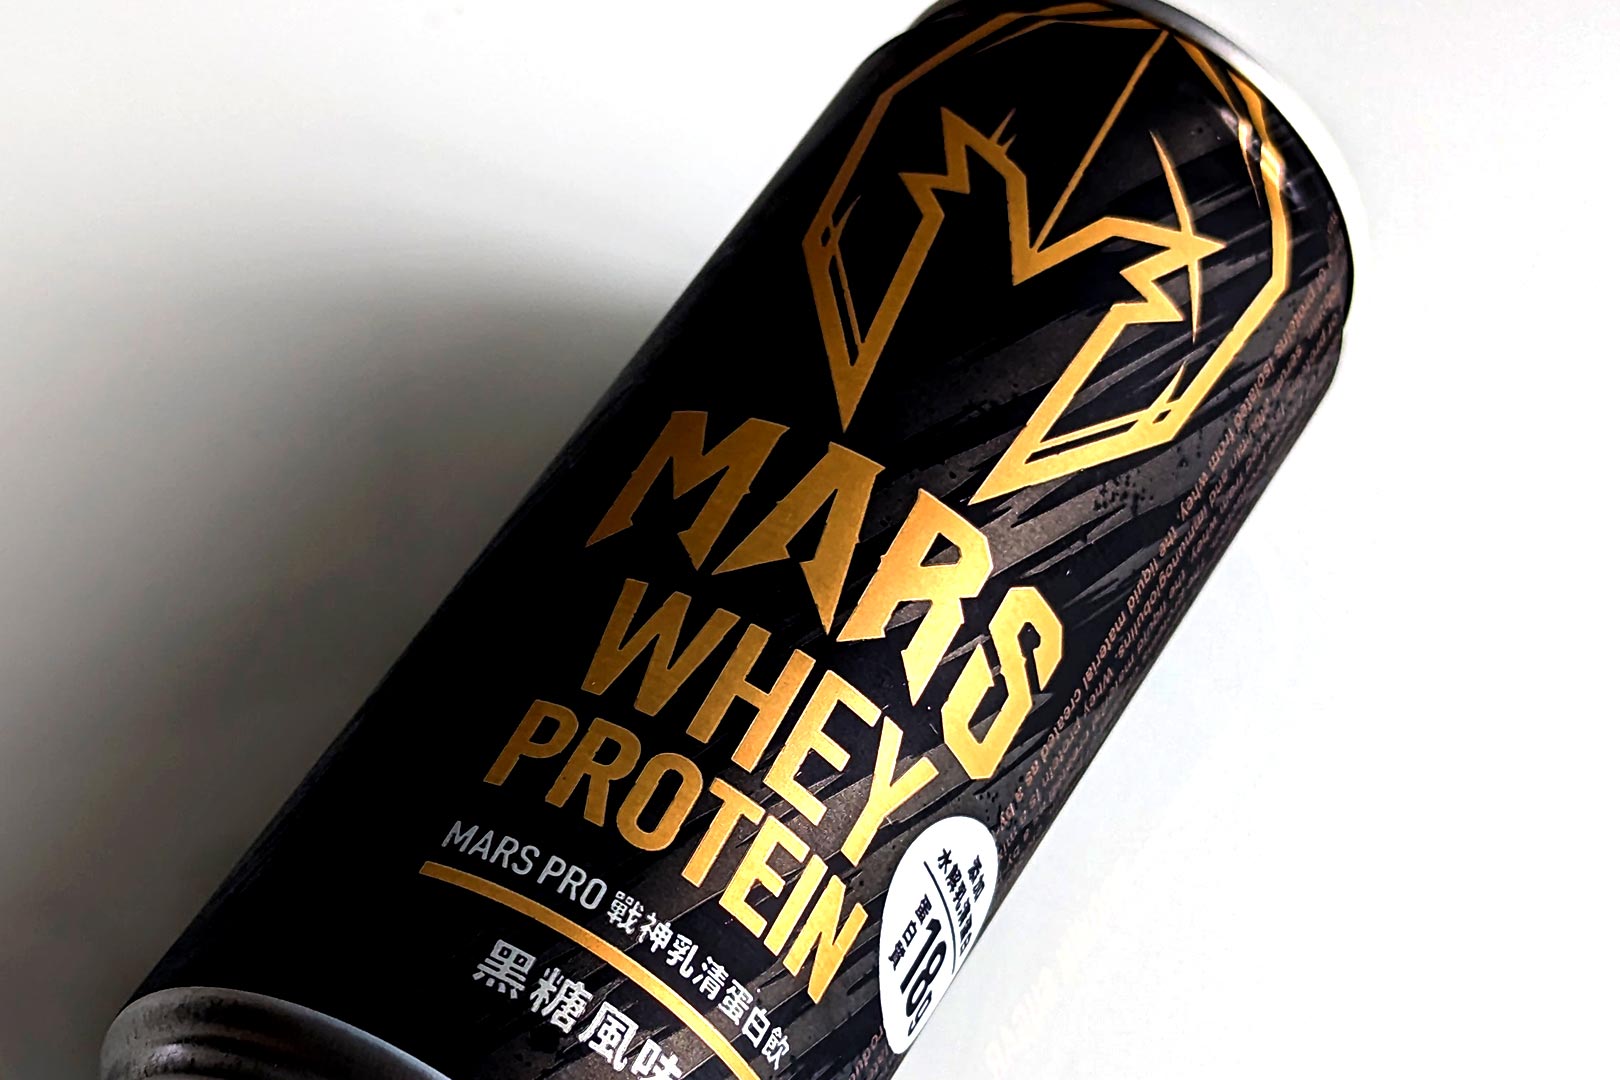 Mars Whey Protein Rtd Review